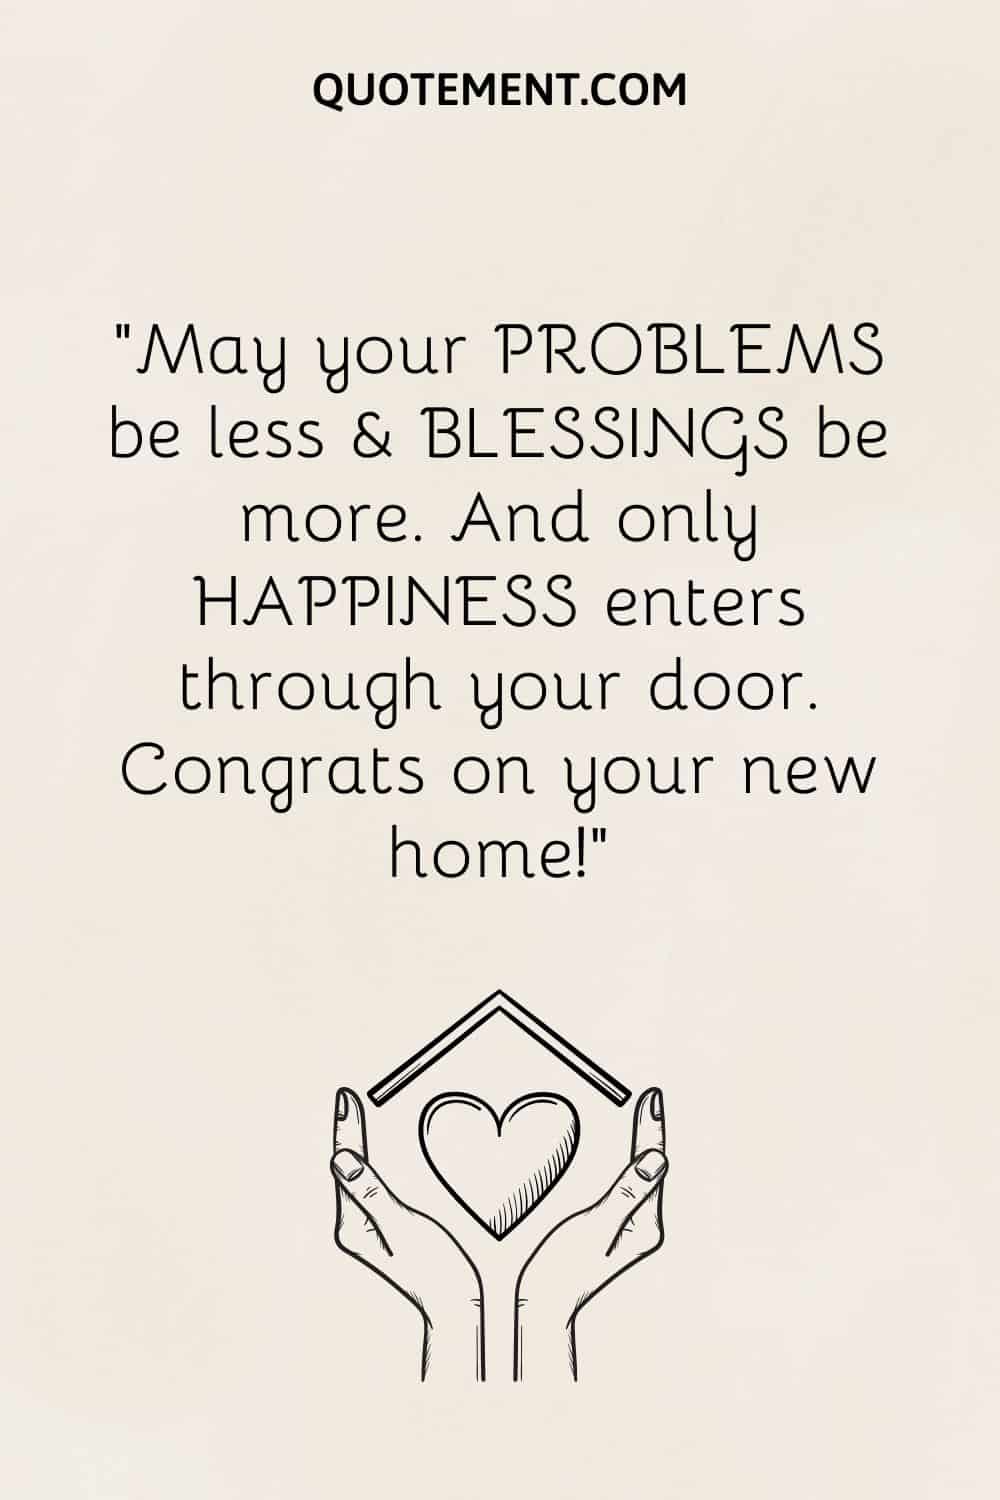 May your PROBLEMS be less & BLESSINGS be more